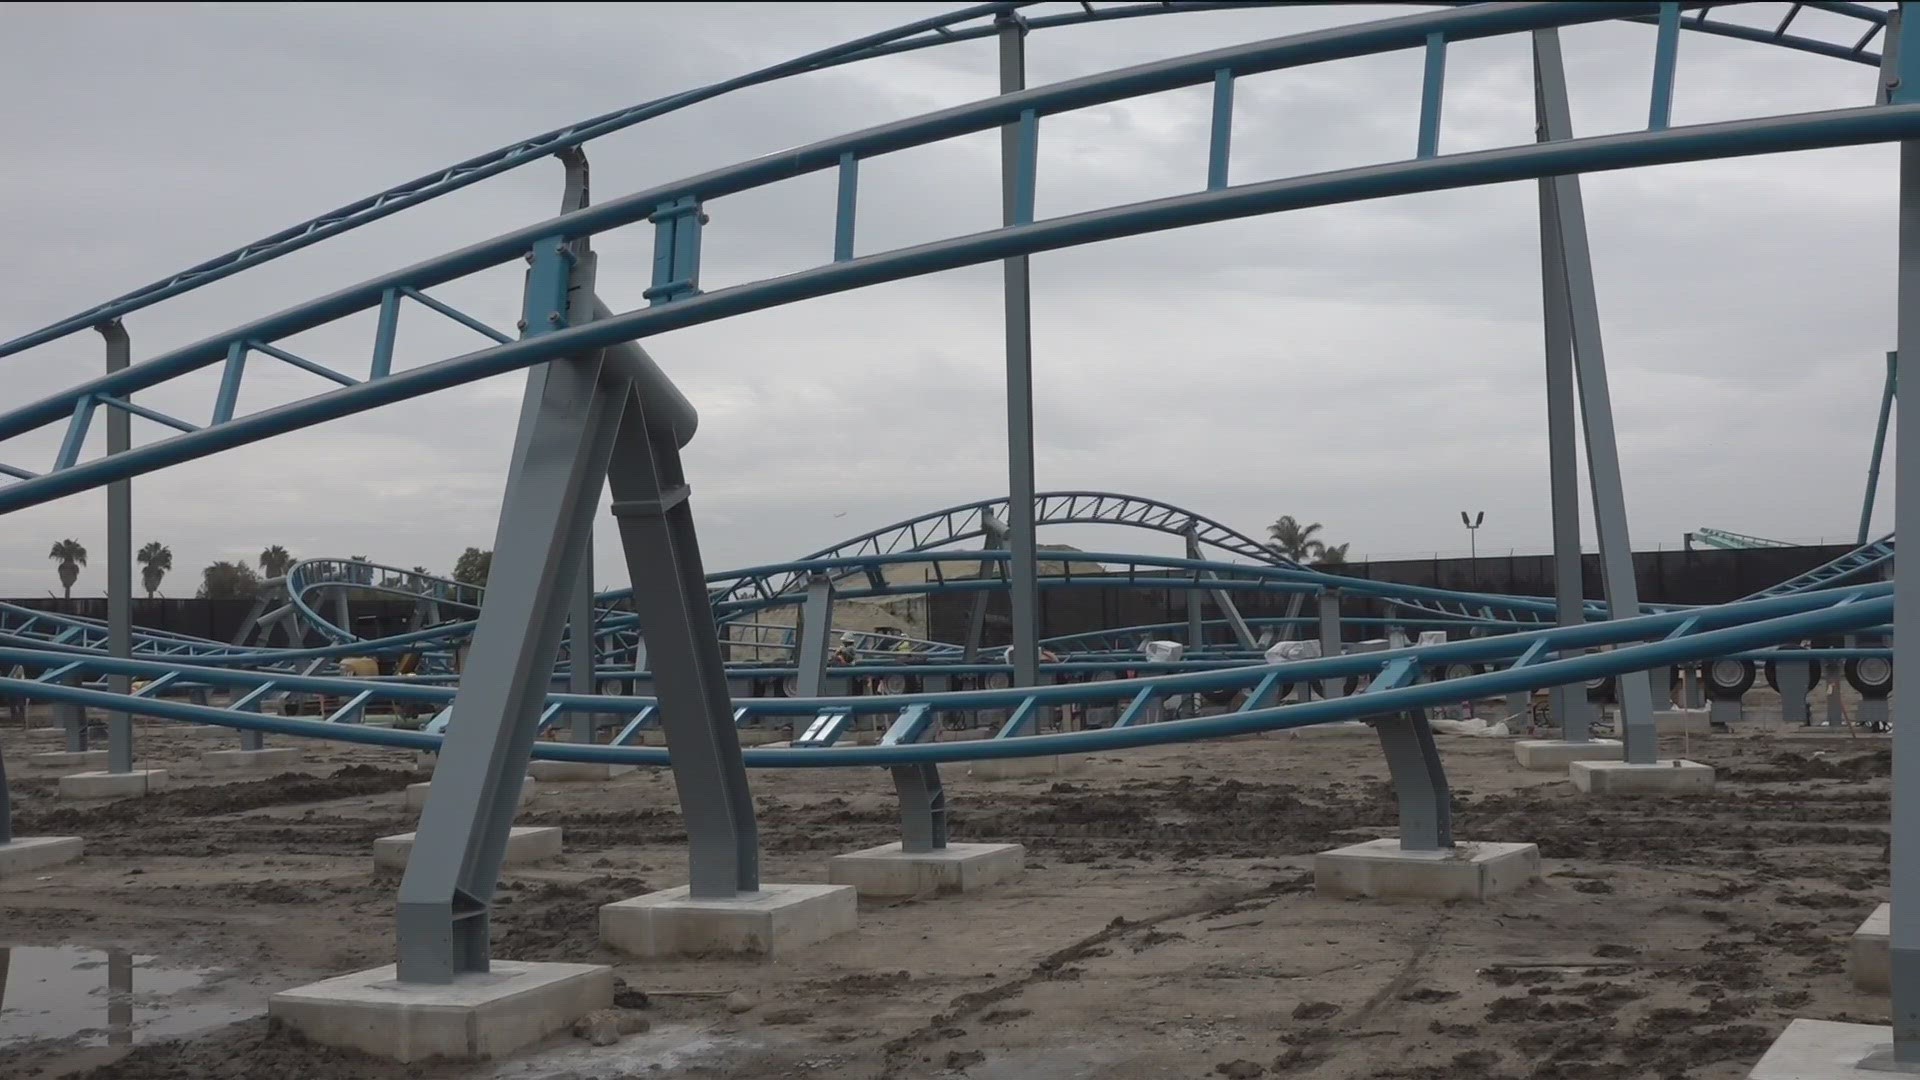 The coaster is expected to open this spring.